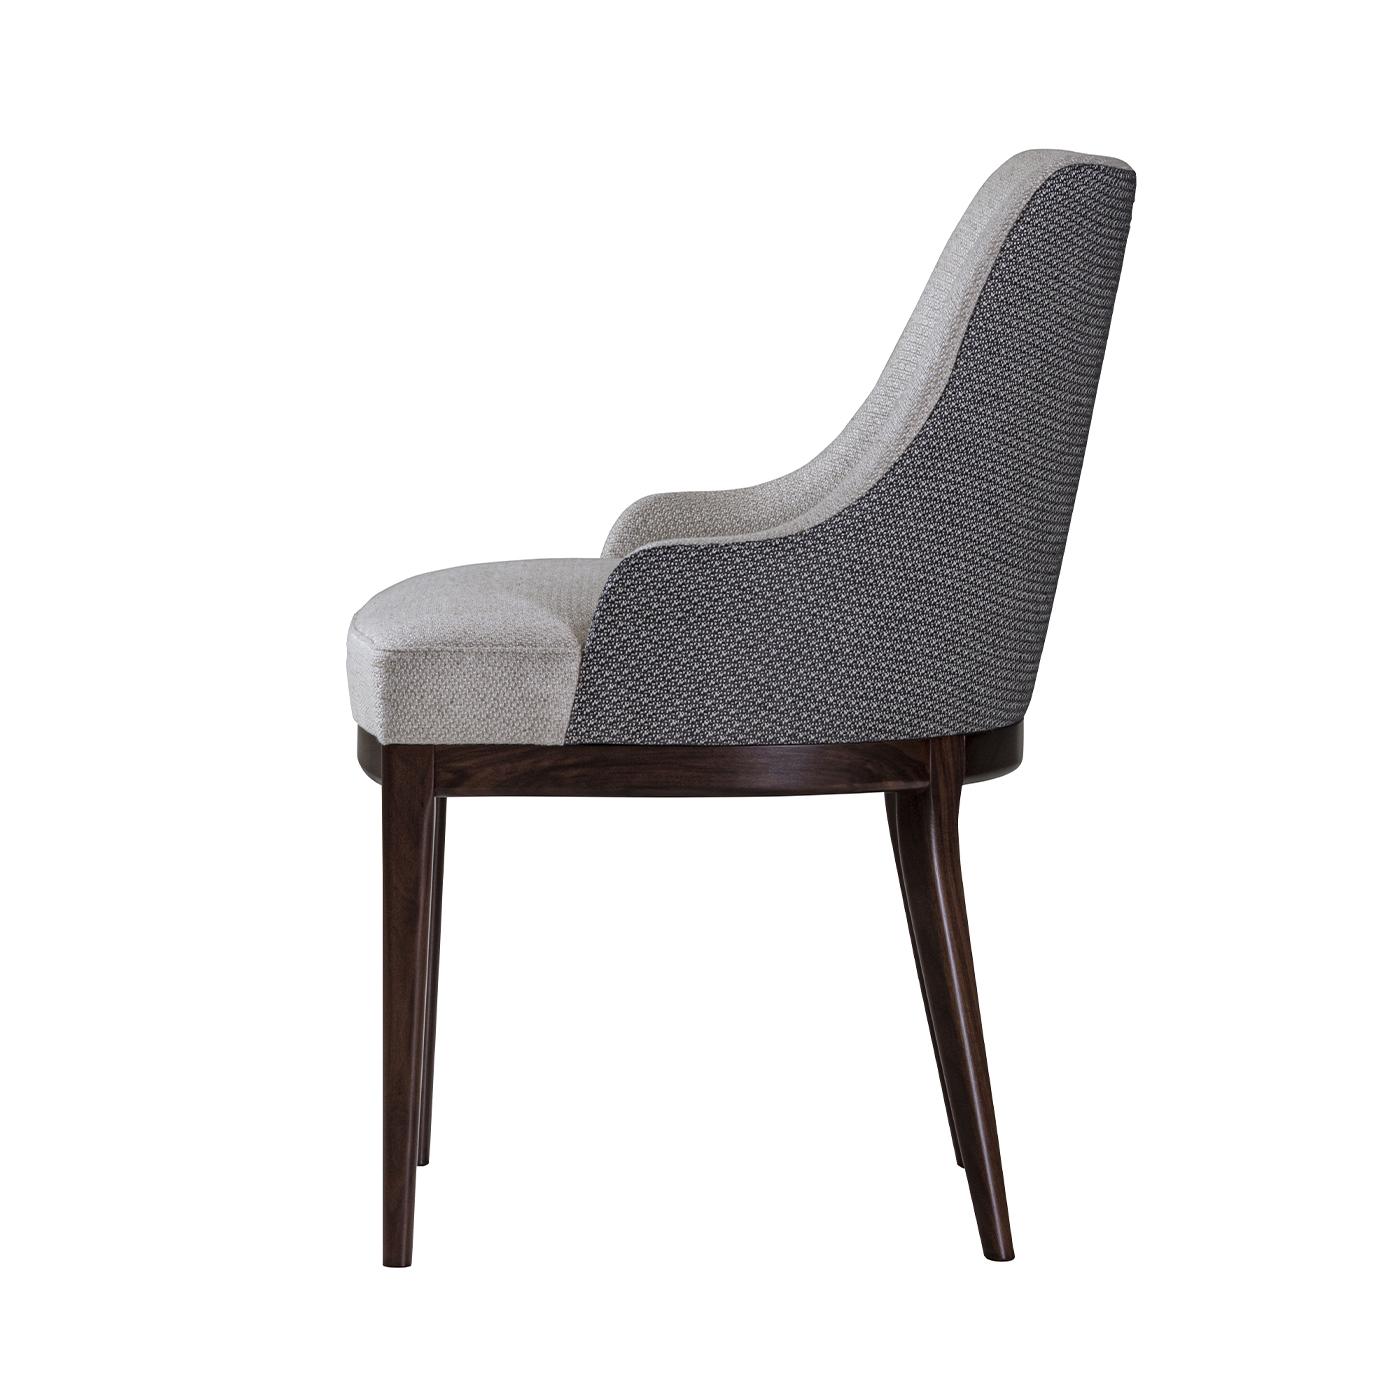 Other Adele White Dining Chair